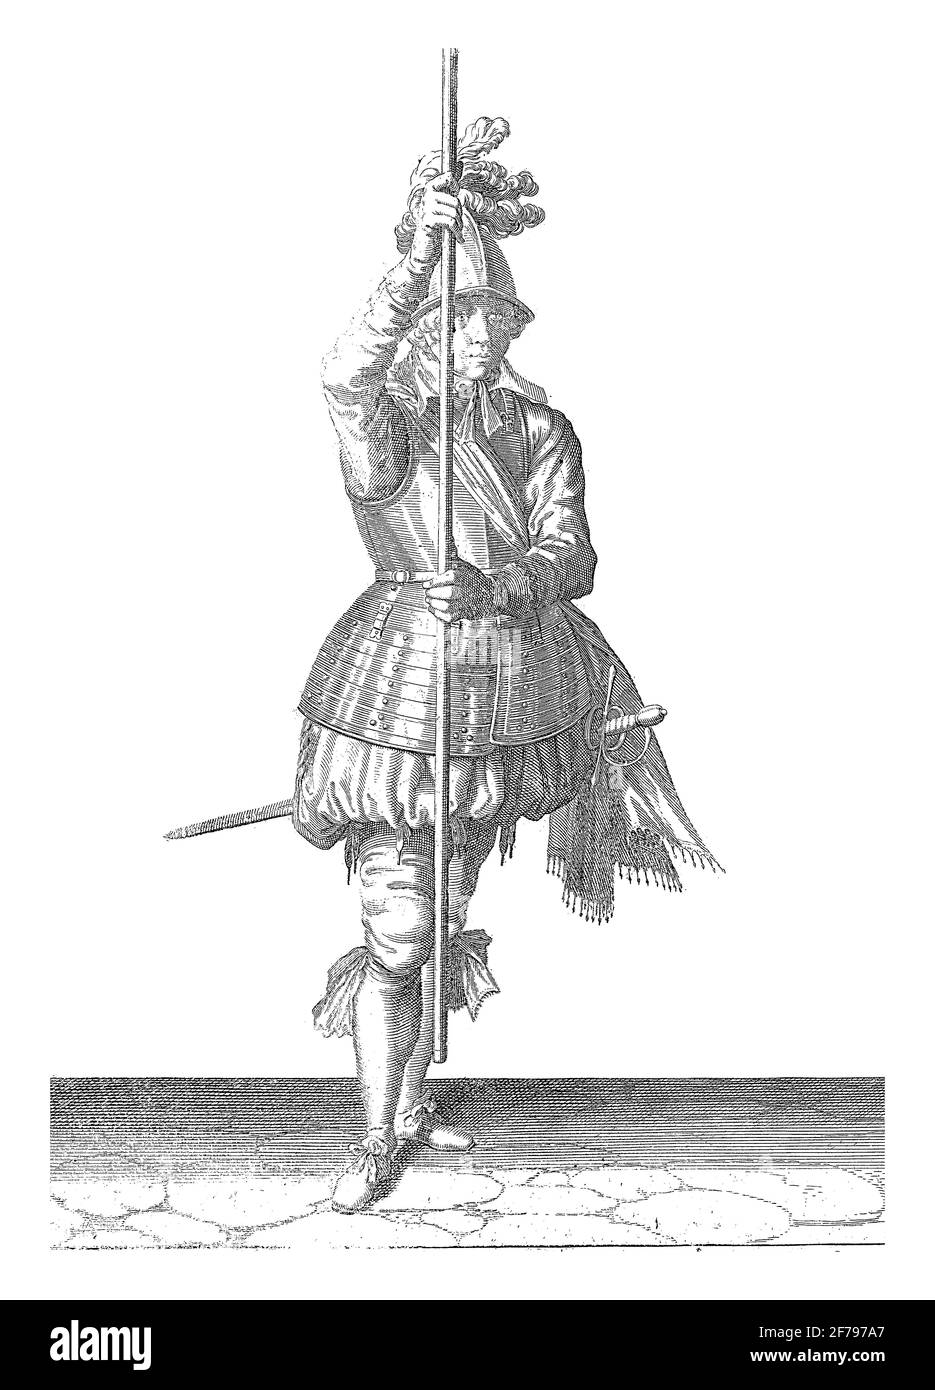 A full-length soldier holding a skewer (lance) with both hands upright slightly above the ground in front of him, vintage engraving. Stock Photo